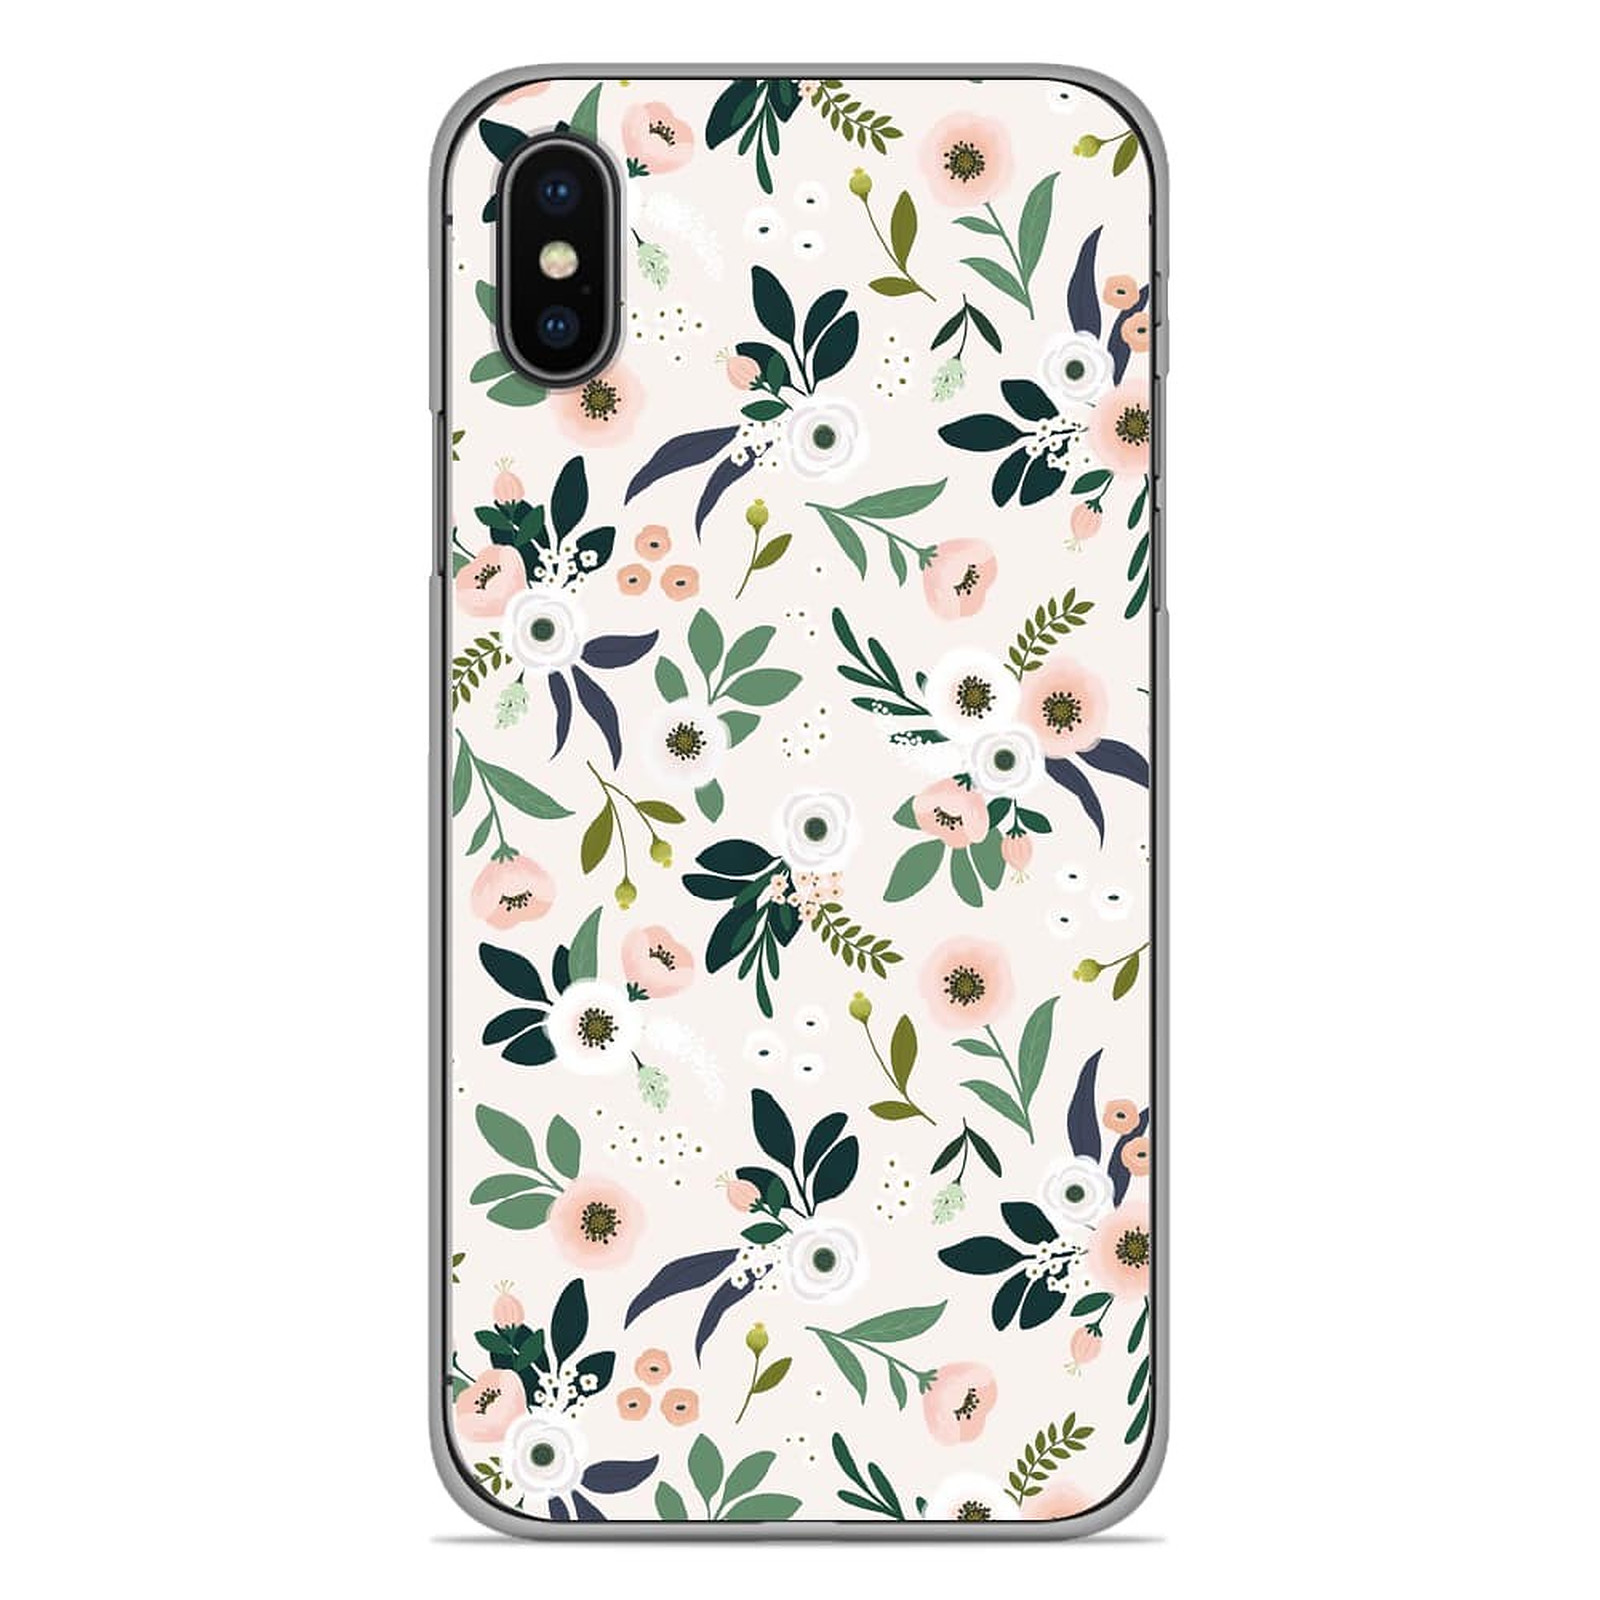 1001 Coques Coque silicone gel Apple iPhone X / XS motif Flowers - Coque telephone 1001Coques